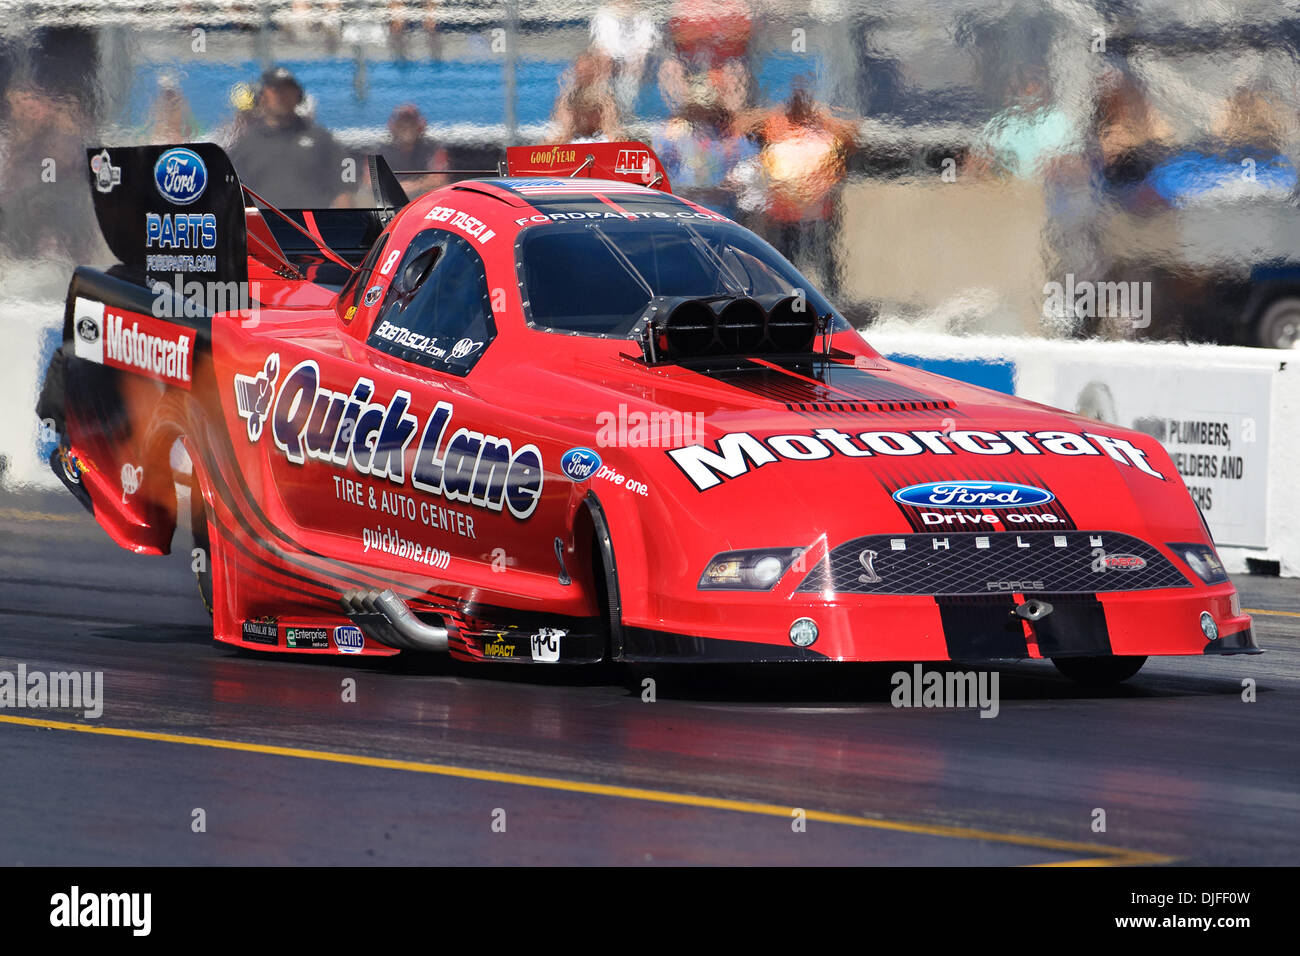 Bob Tasca heads to a 1st round win in his Motorcraft / Quick Lane Mustang Top Fuel funny car.  NHRA Route 66 Nationals held at Route 66 Raceway, Joliet, Illinois. (Credit Image: © John Rowland/Southcreek Global/ZUMApress.com) Stock Photo